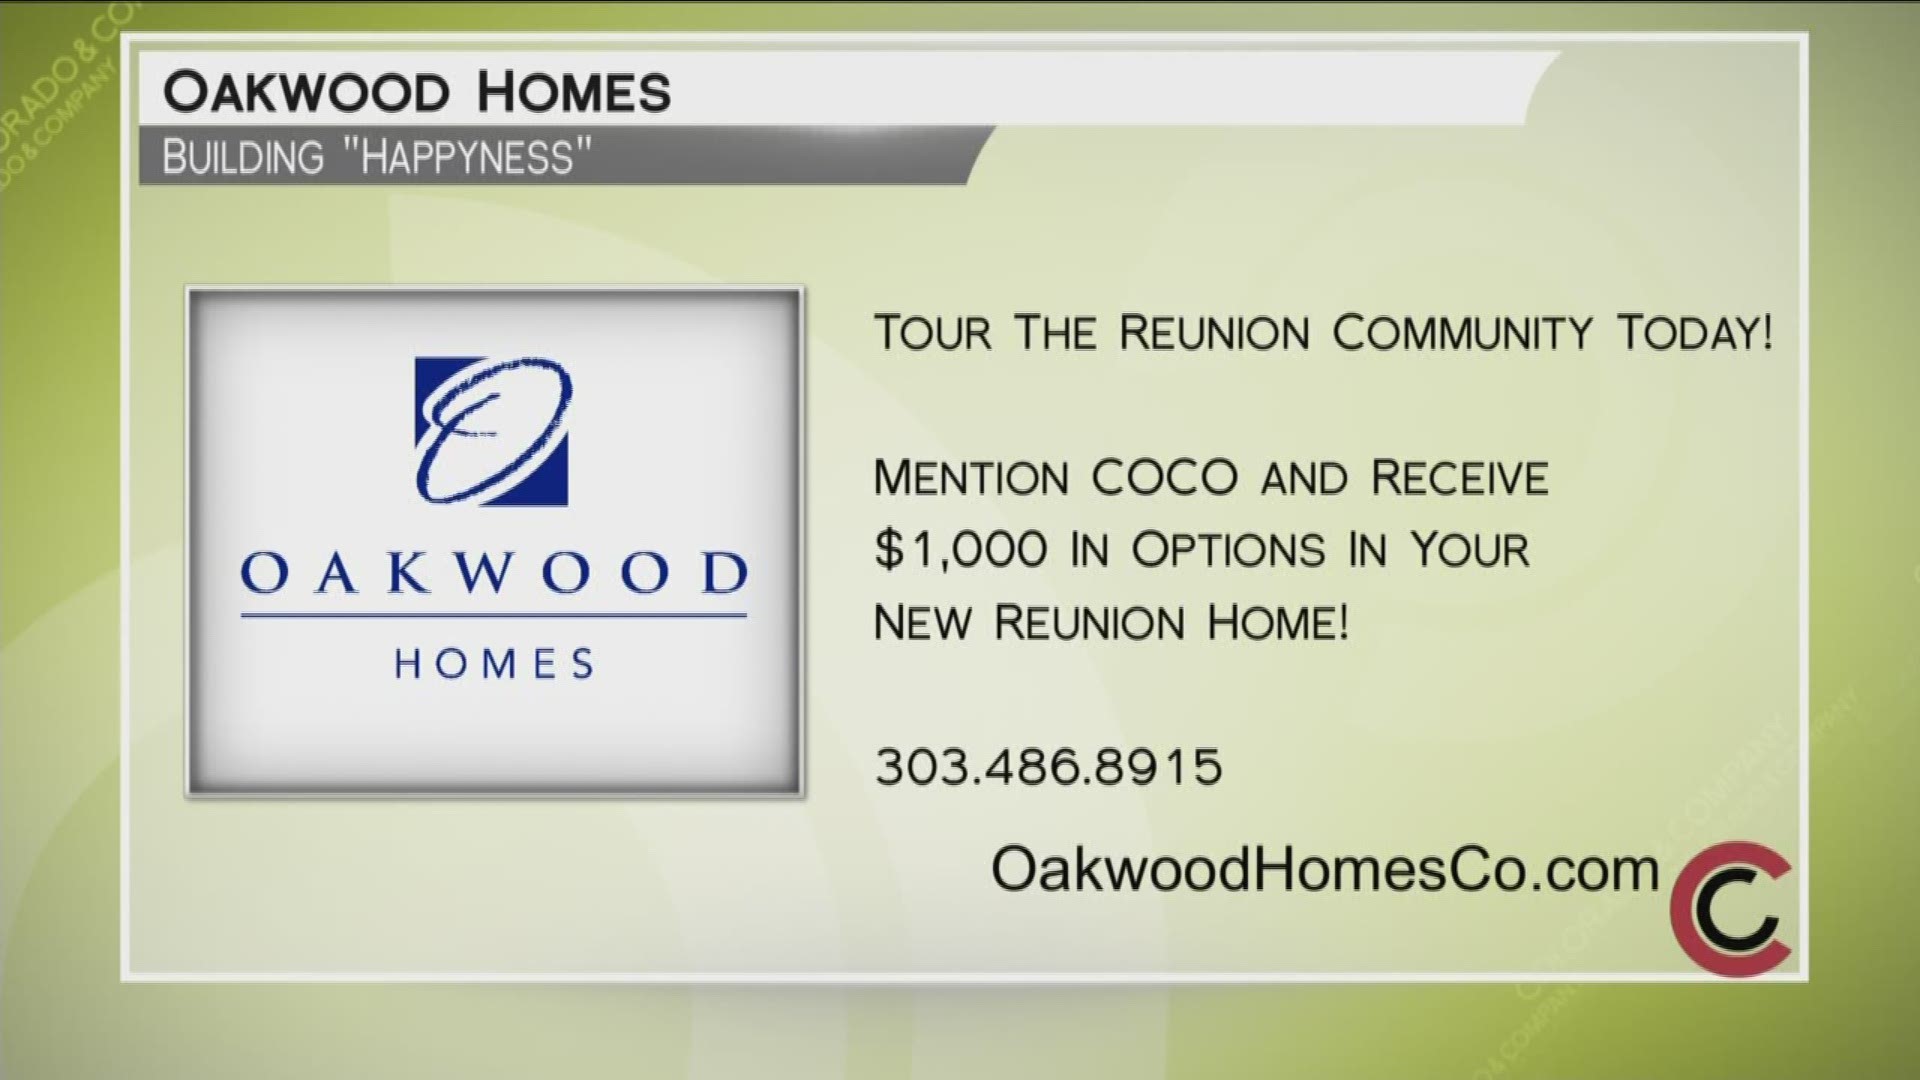 Tour the Oakwood Homes Community in Reunion! Call 303.486.8915 to schedule your appointment. Learn more about their communities at OakwoodHomesCO.com.